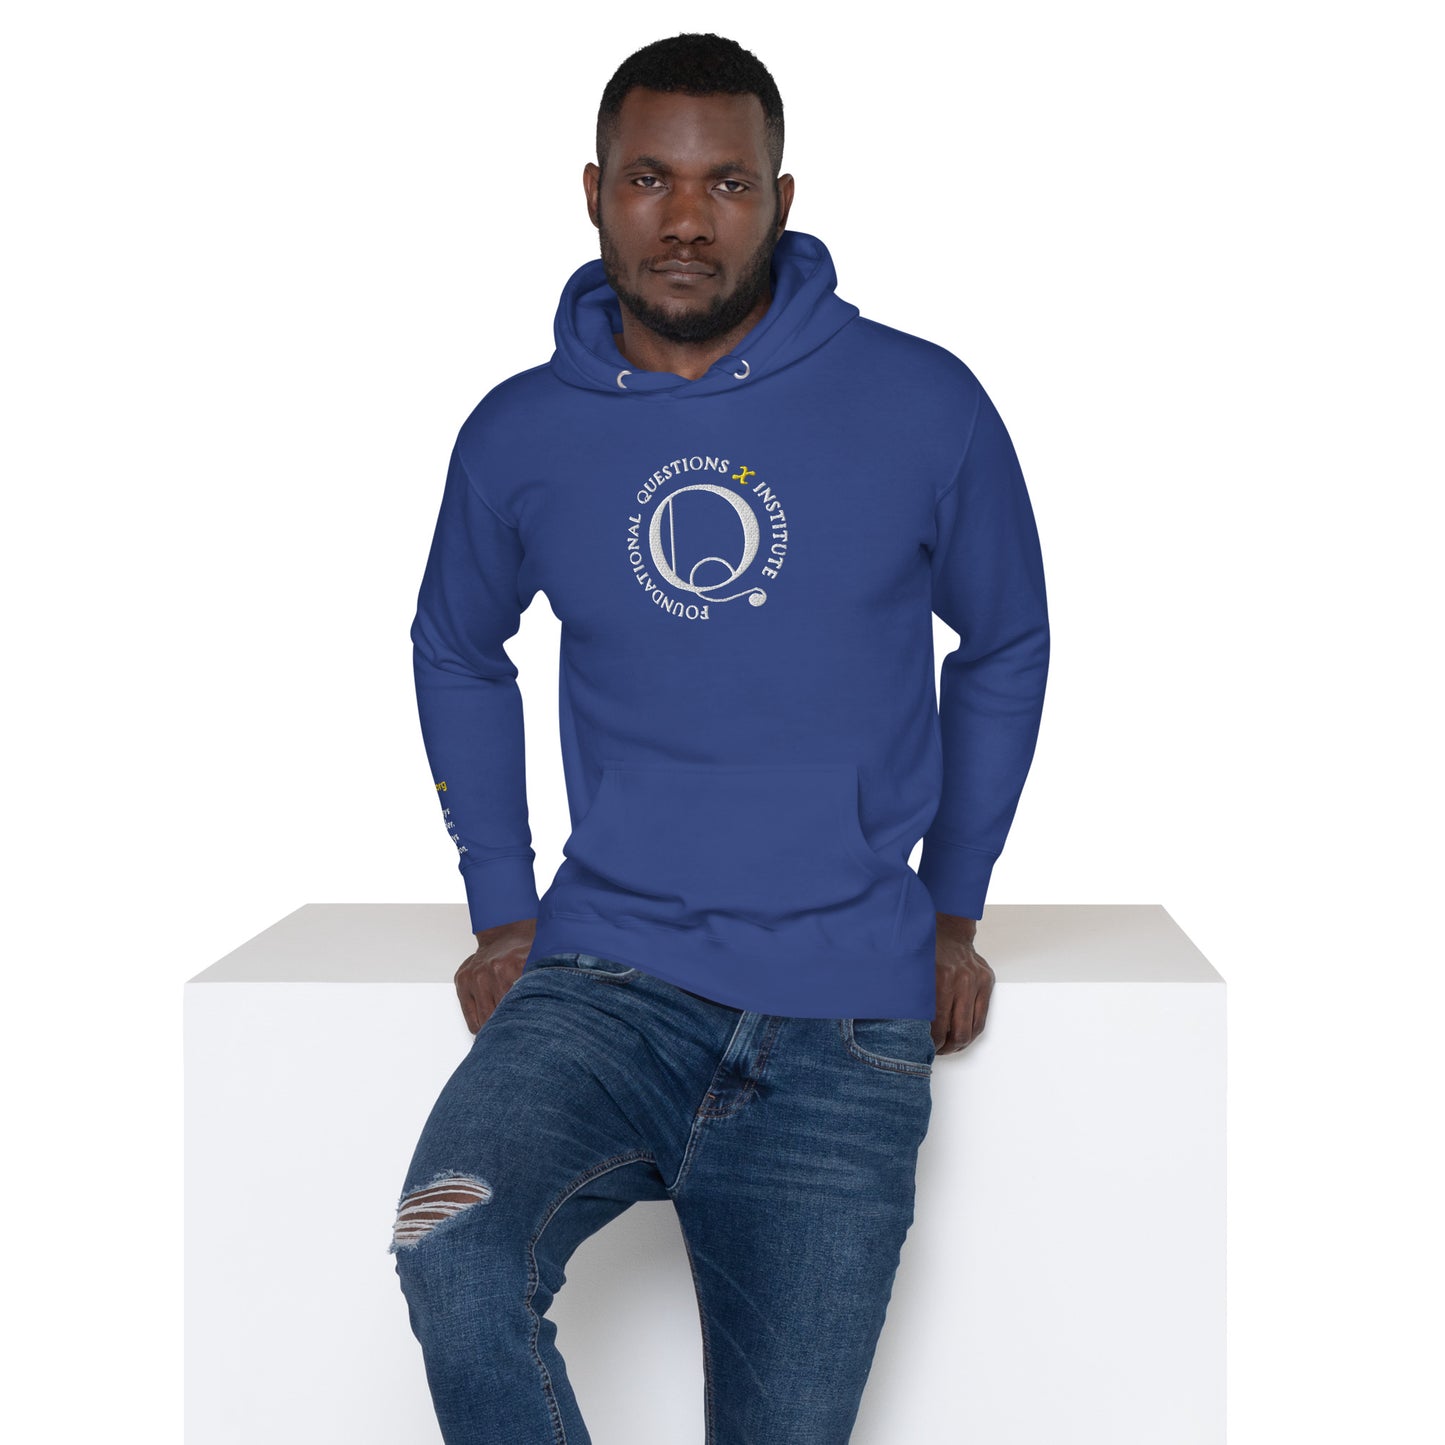 FQxI hoodie for all, embroidered on right wrist too